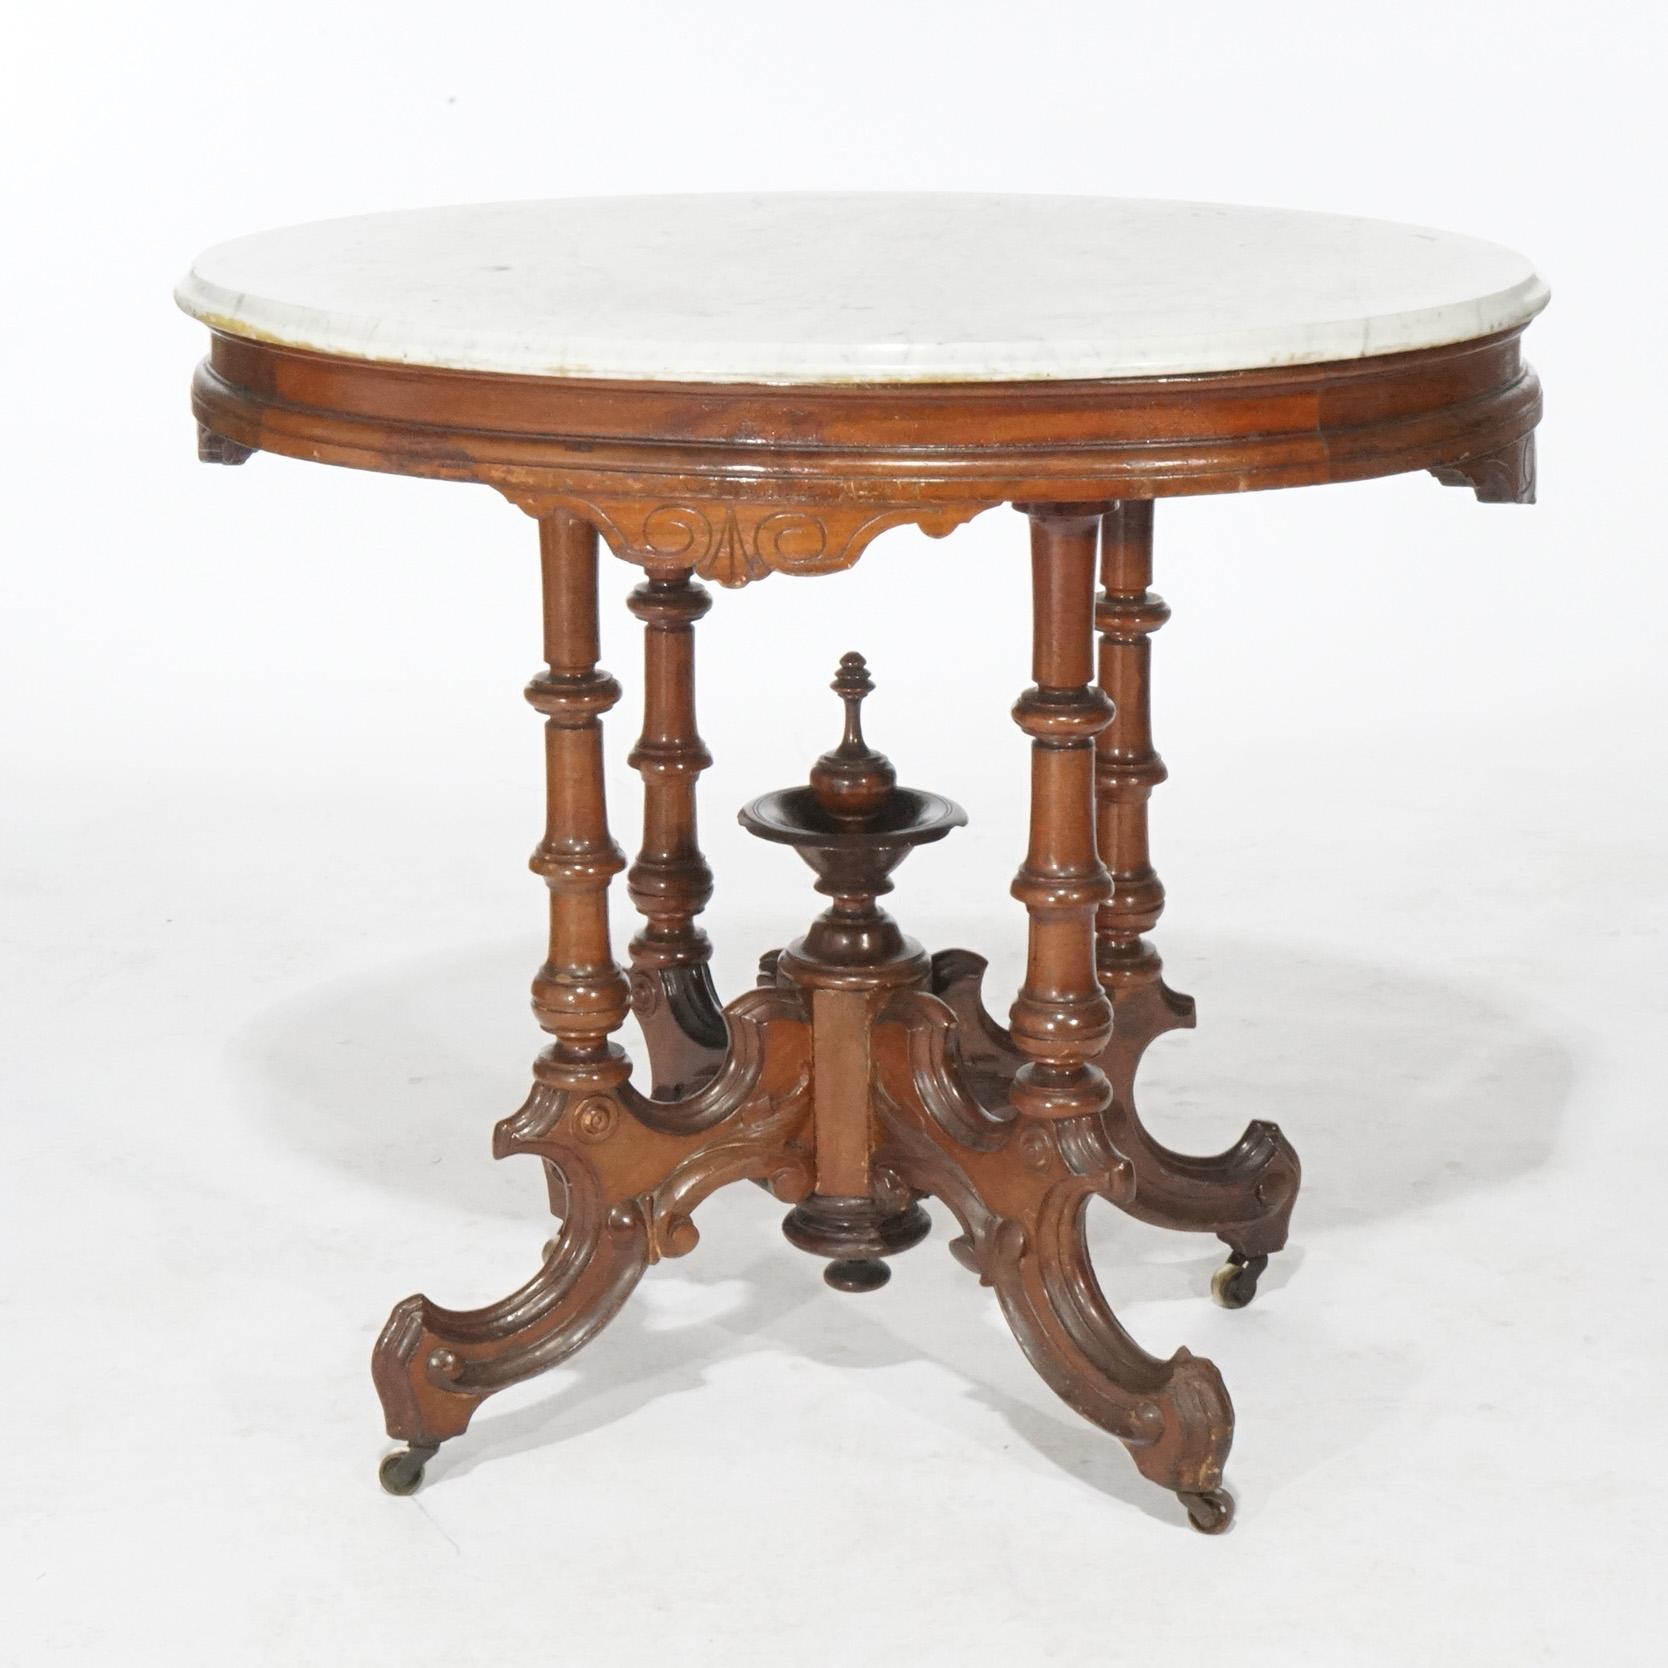 An antique Renaissance Revival parlor center table offers beveled oval marble top over walnut base having scroll incised shaped skirt, four banded column supports with a central urn form turned finial, circa 1890

Measures- 30''H x 33.75''W x